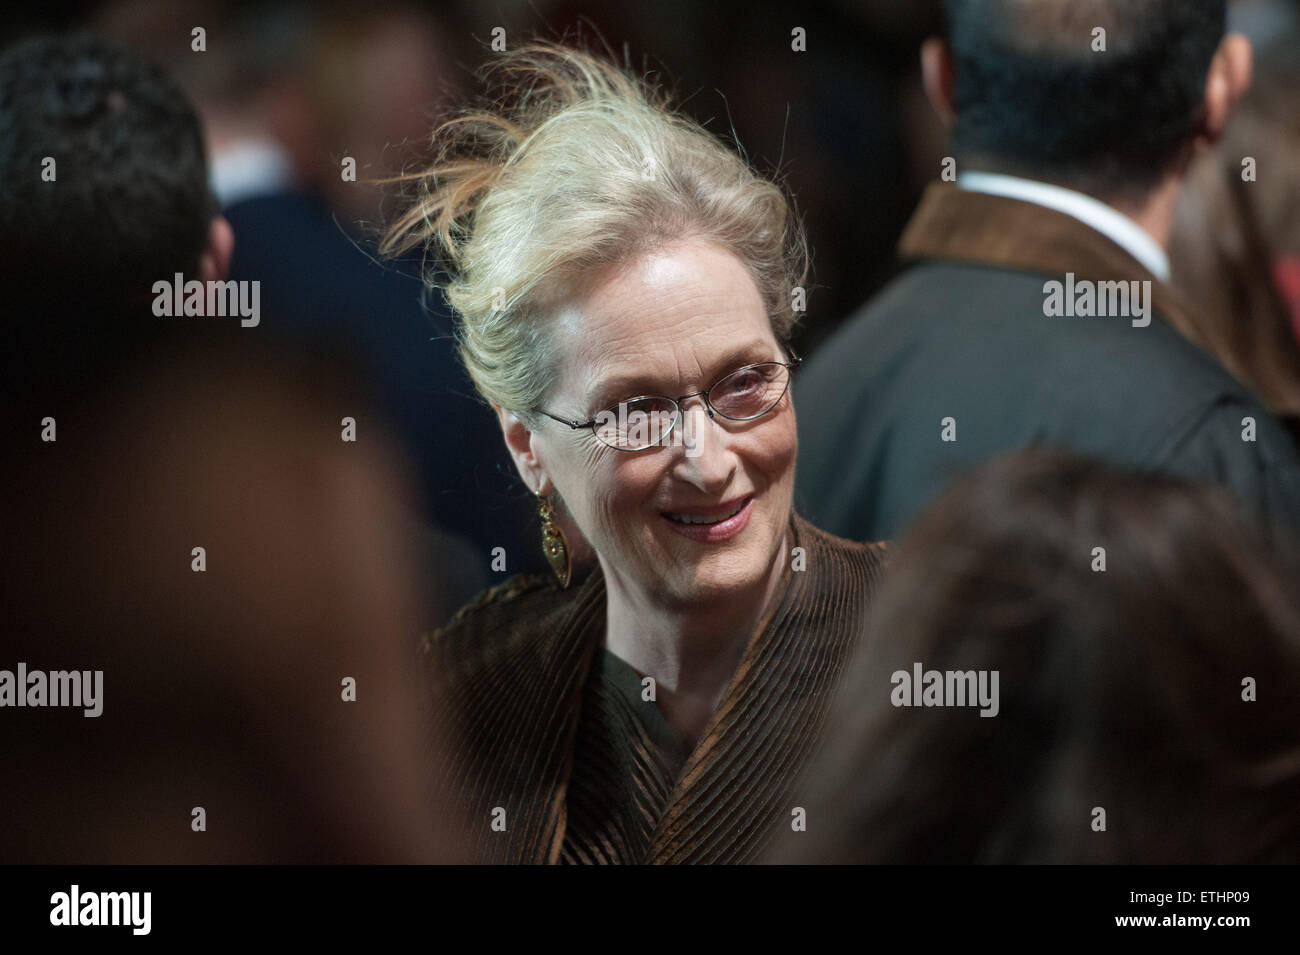 'Into The Woods' UK film premiere held at the Curzon Mayfair - Arrivals.  Featuring: Meryl Streep Where: London, United Kingdom When: 07 Jan 2015 Credit: Daniel Deme/WENN.com Stock Photo